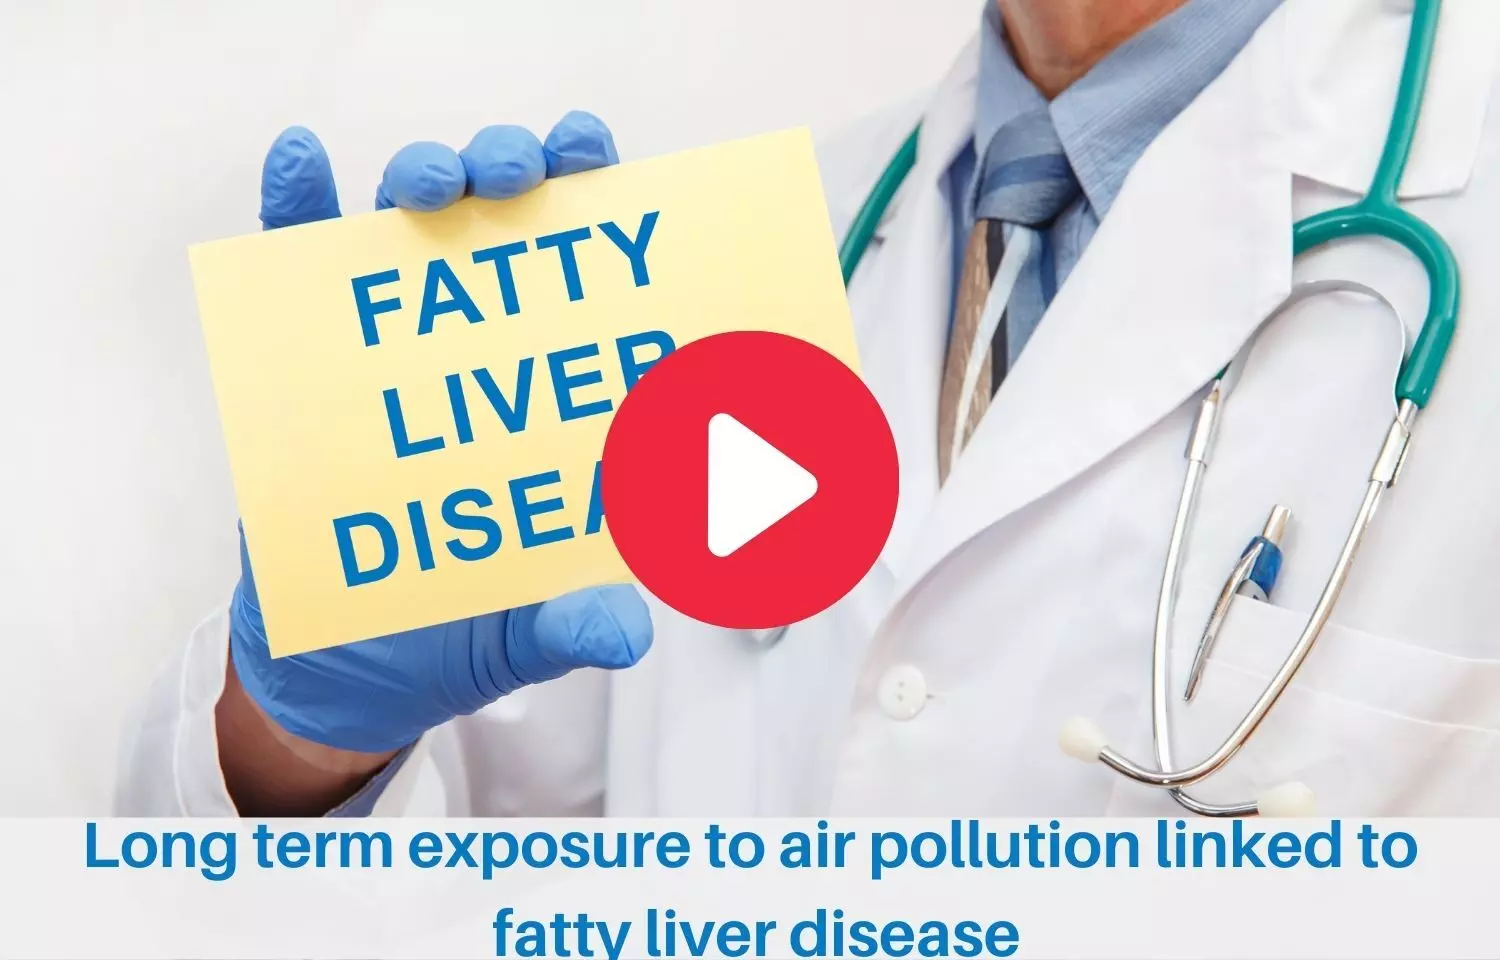 Long term exposure to air pollution may cause fatty liver disease